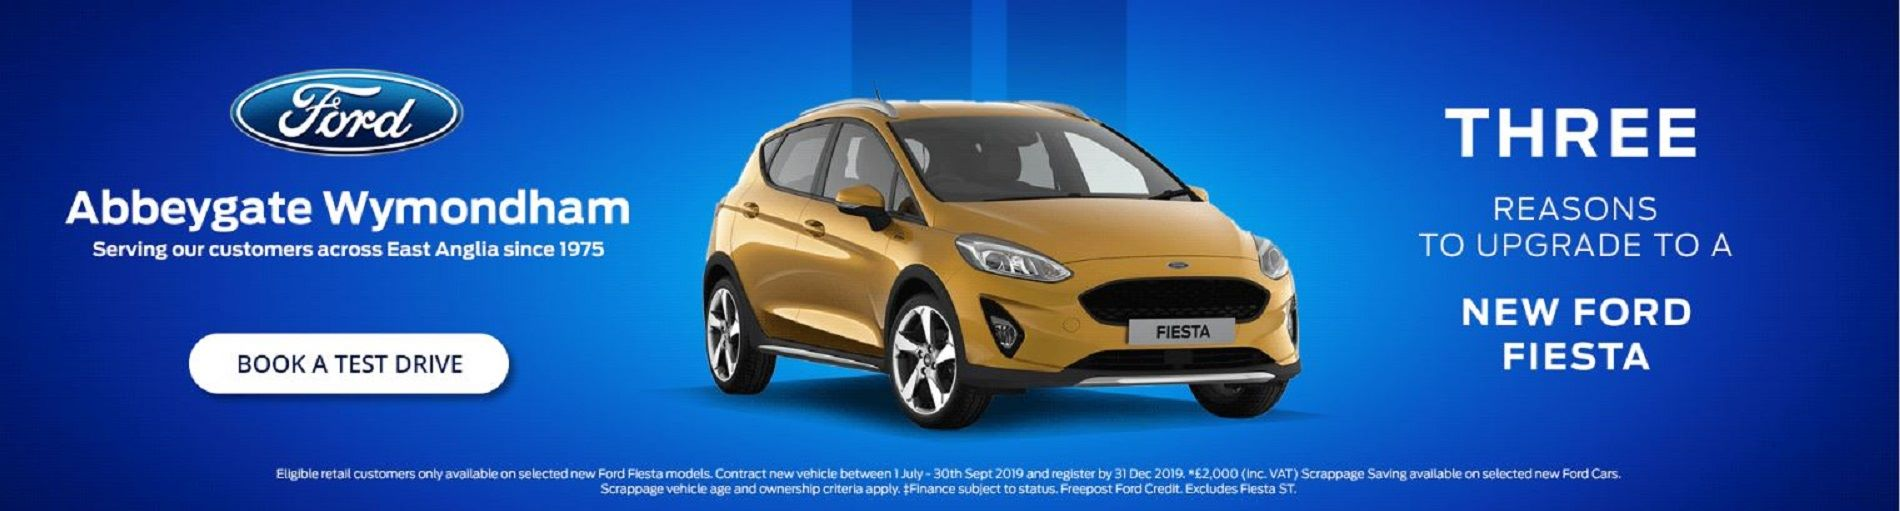 Three Reasons to Upgrade to a New Fiesta